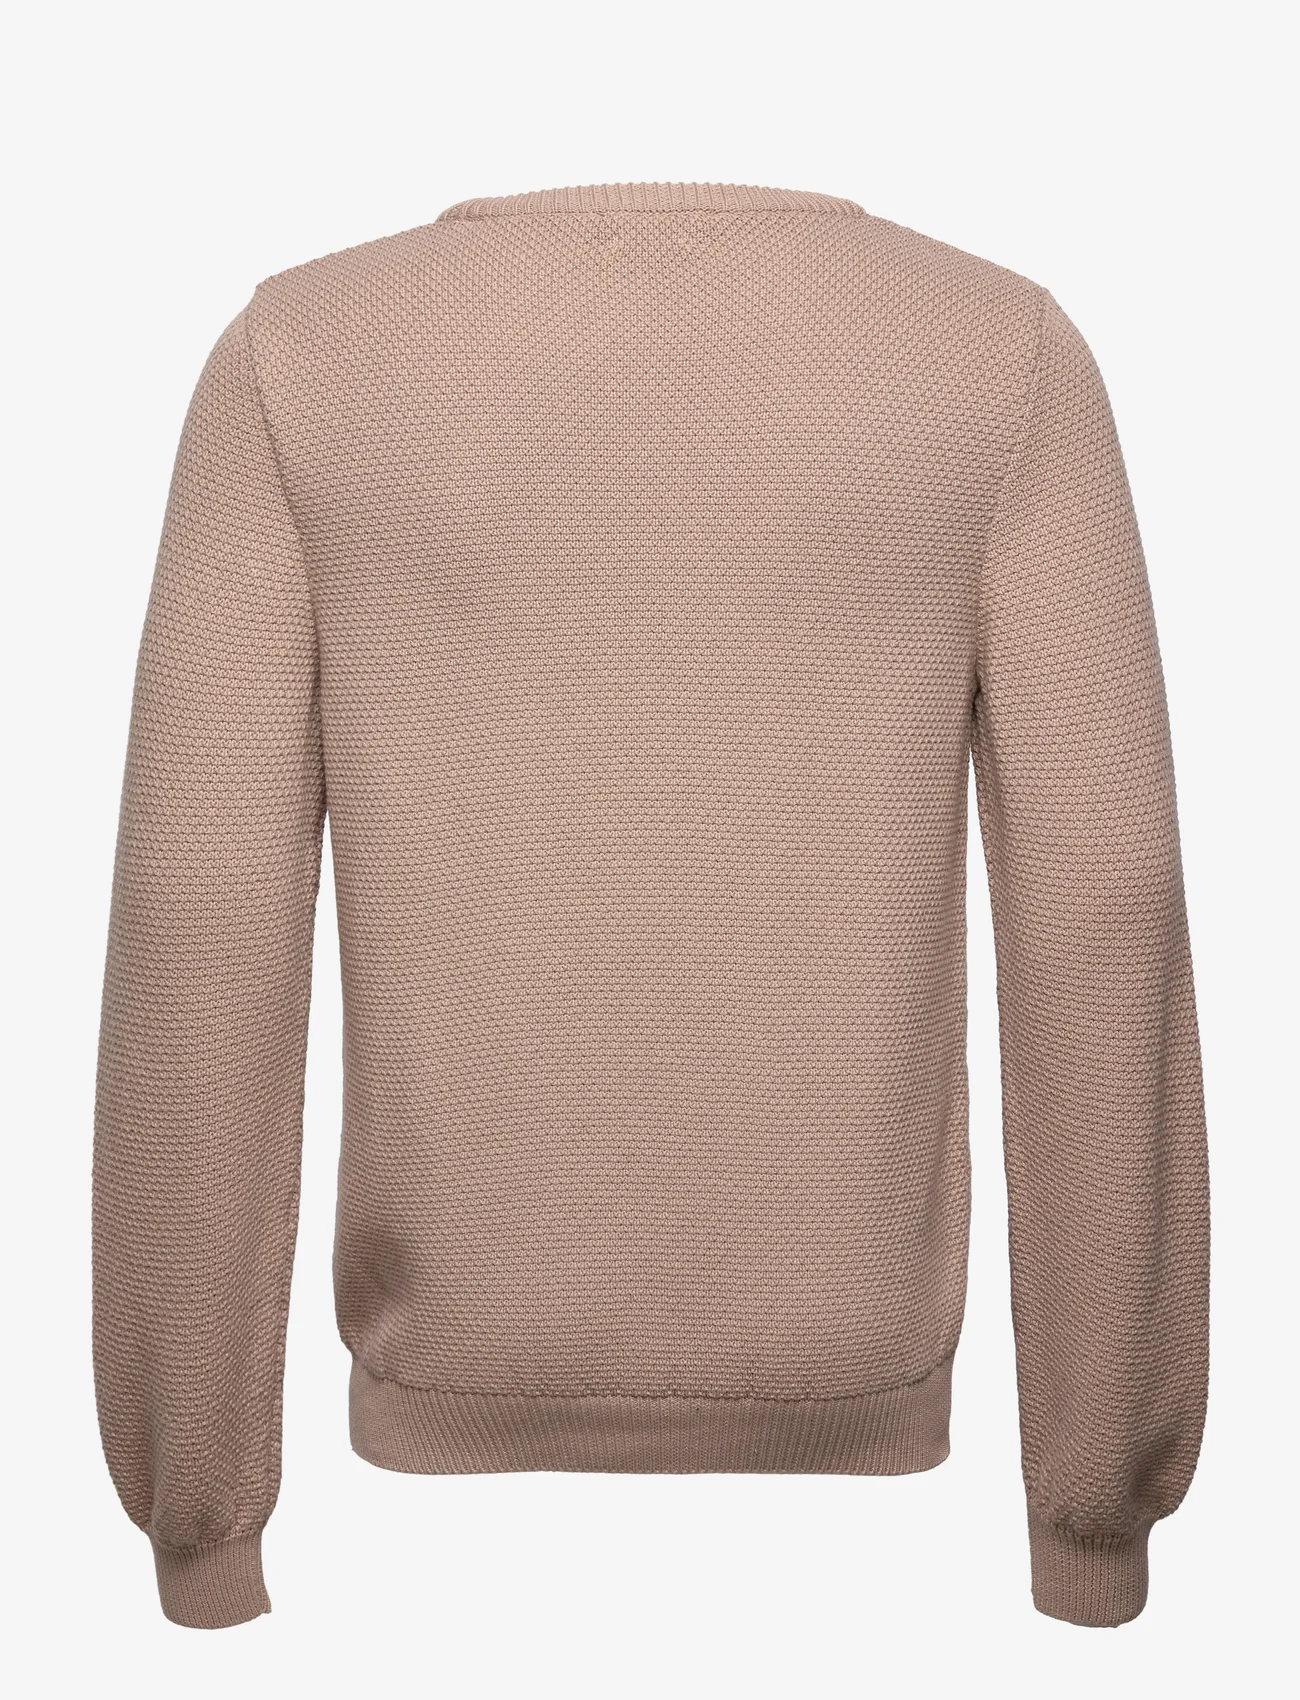 By Garment Makers - The Organic Waffle knit - perusneuleet - light taupe - 1